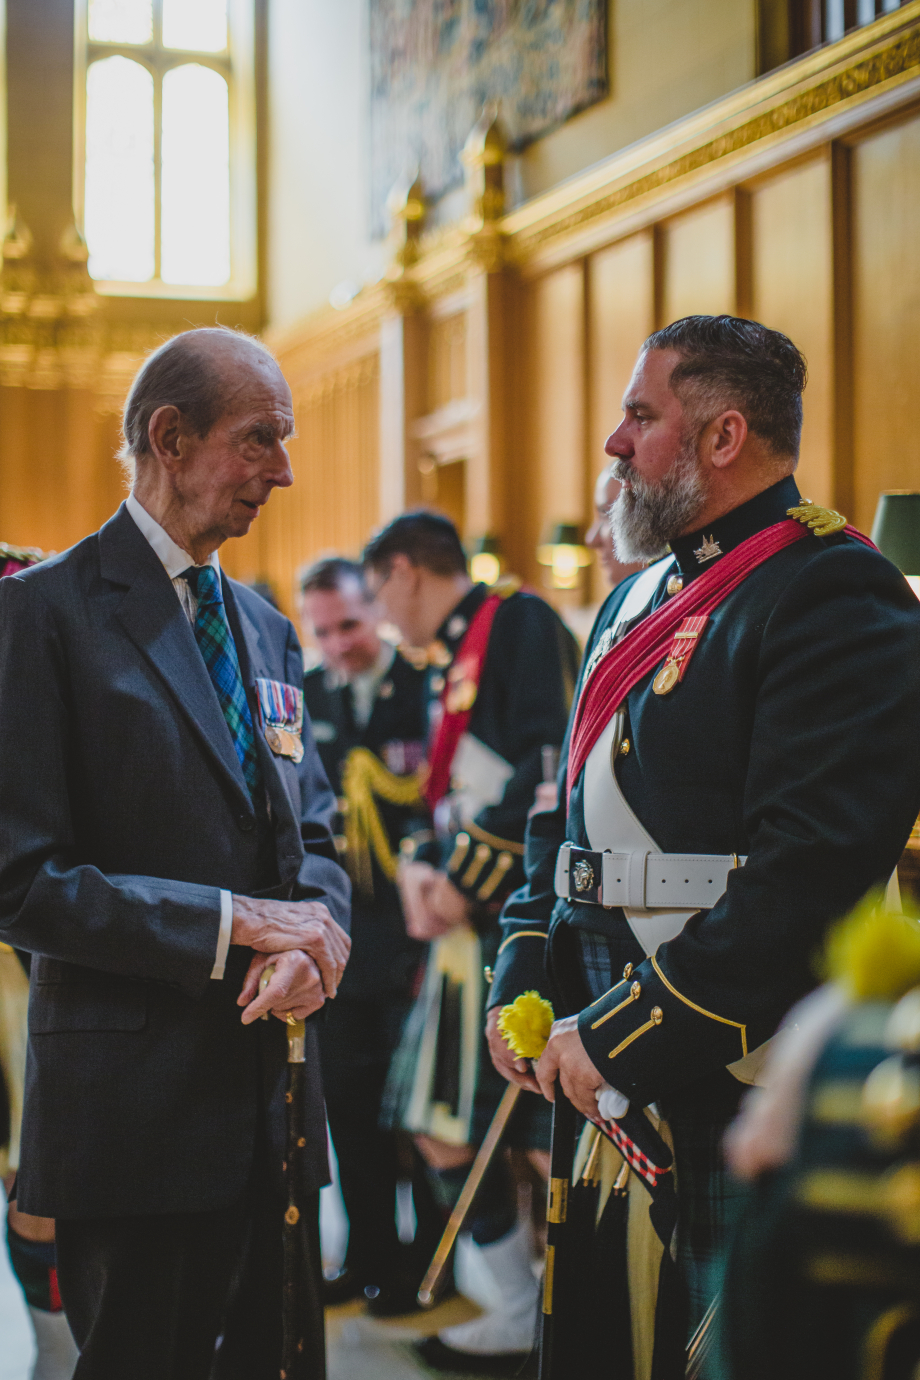 The Duke of Kent attends a Drumhead Service in Colour Court, St James’s Palace